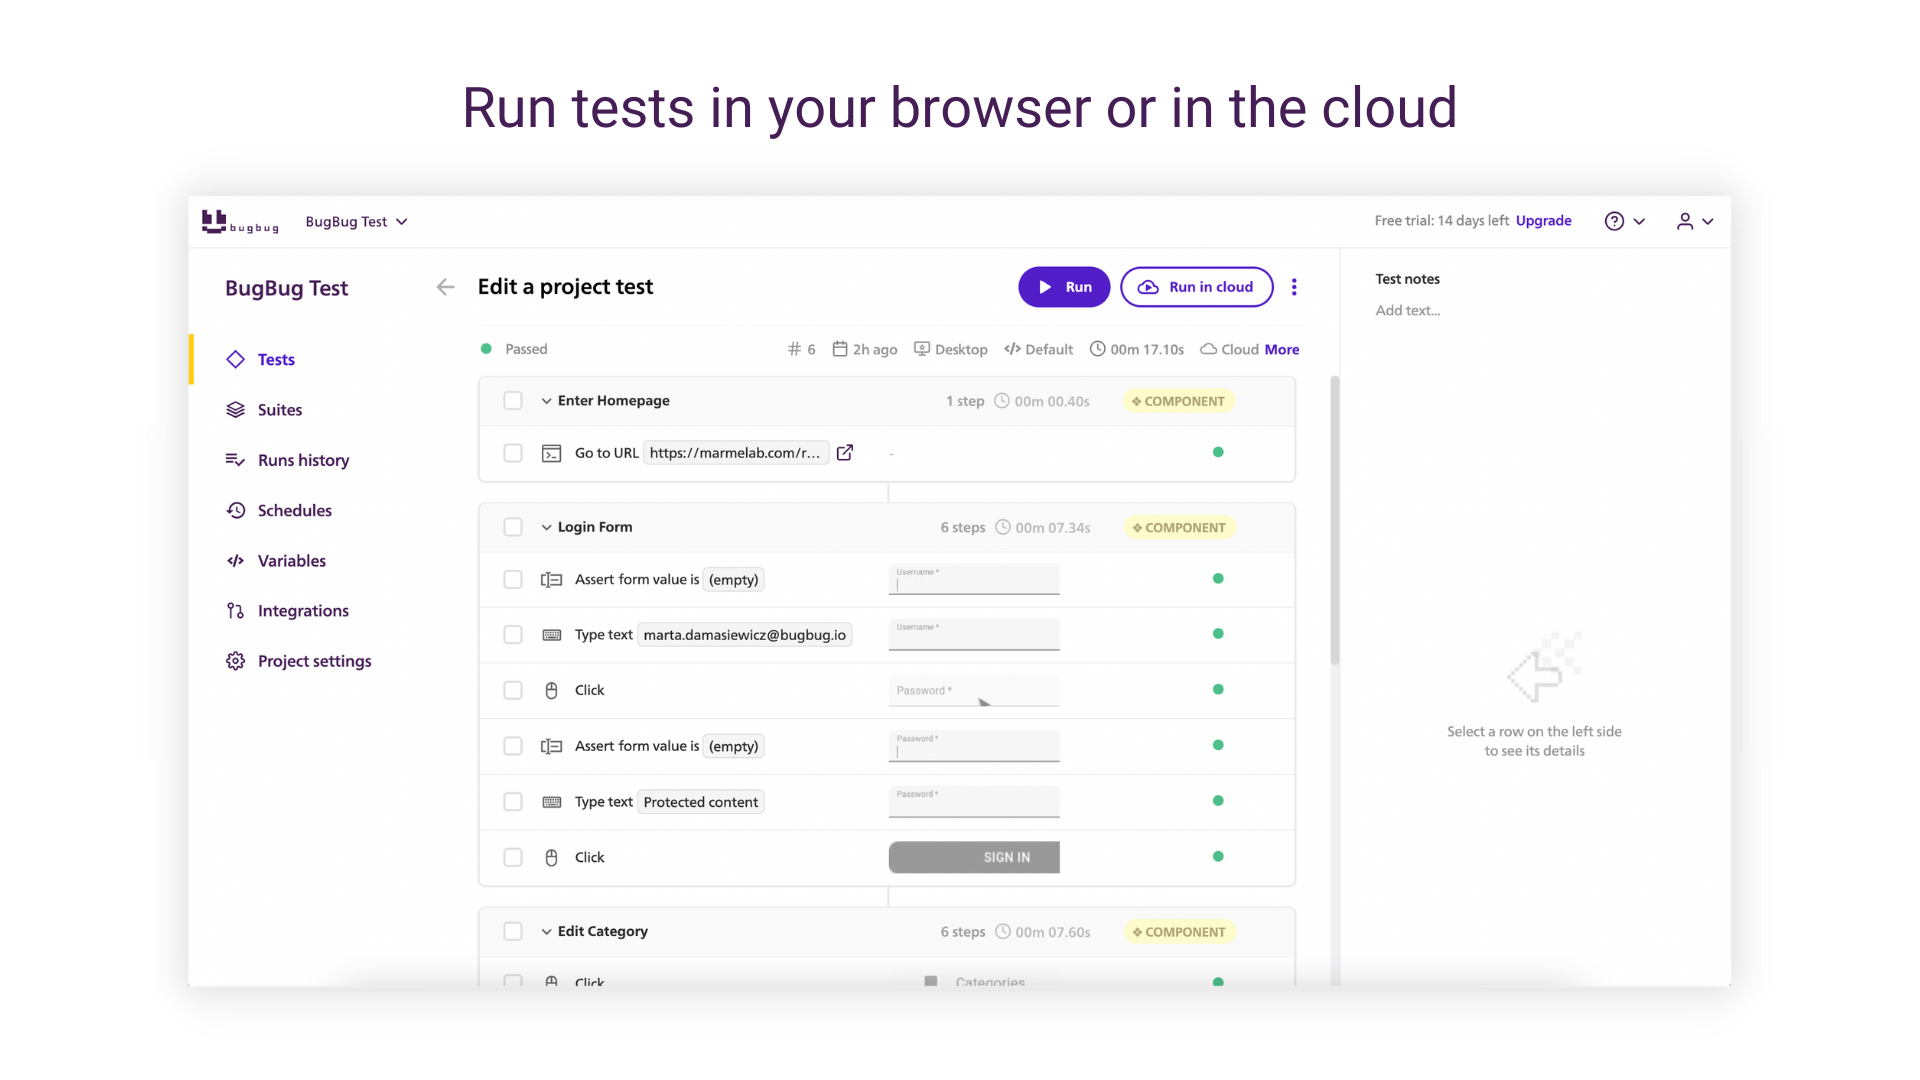 Run tests in your browser or in the cloud